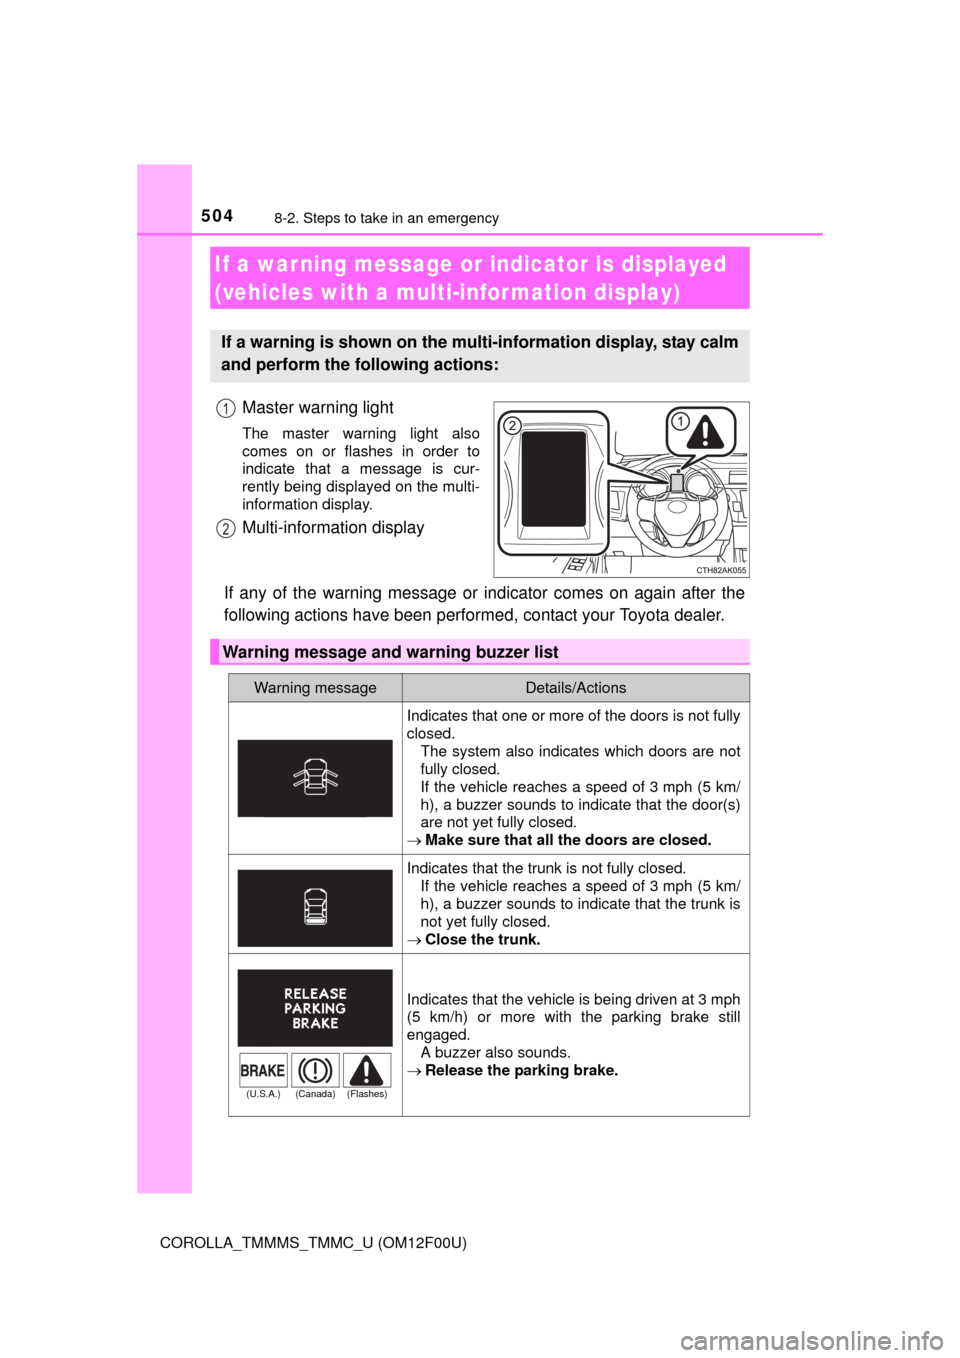 TOYOTA COROLLA 2014 11.G Workshop Manual 5048-2. Steps to take in an emergency
COROLLA_TMMMS_TMMC_U (OM12F00U)
Master warning light
The master warning light also
comes on or flashes in order to
indicate that a message is cur-
rently being di